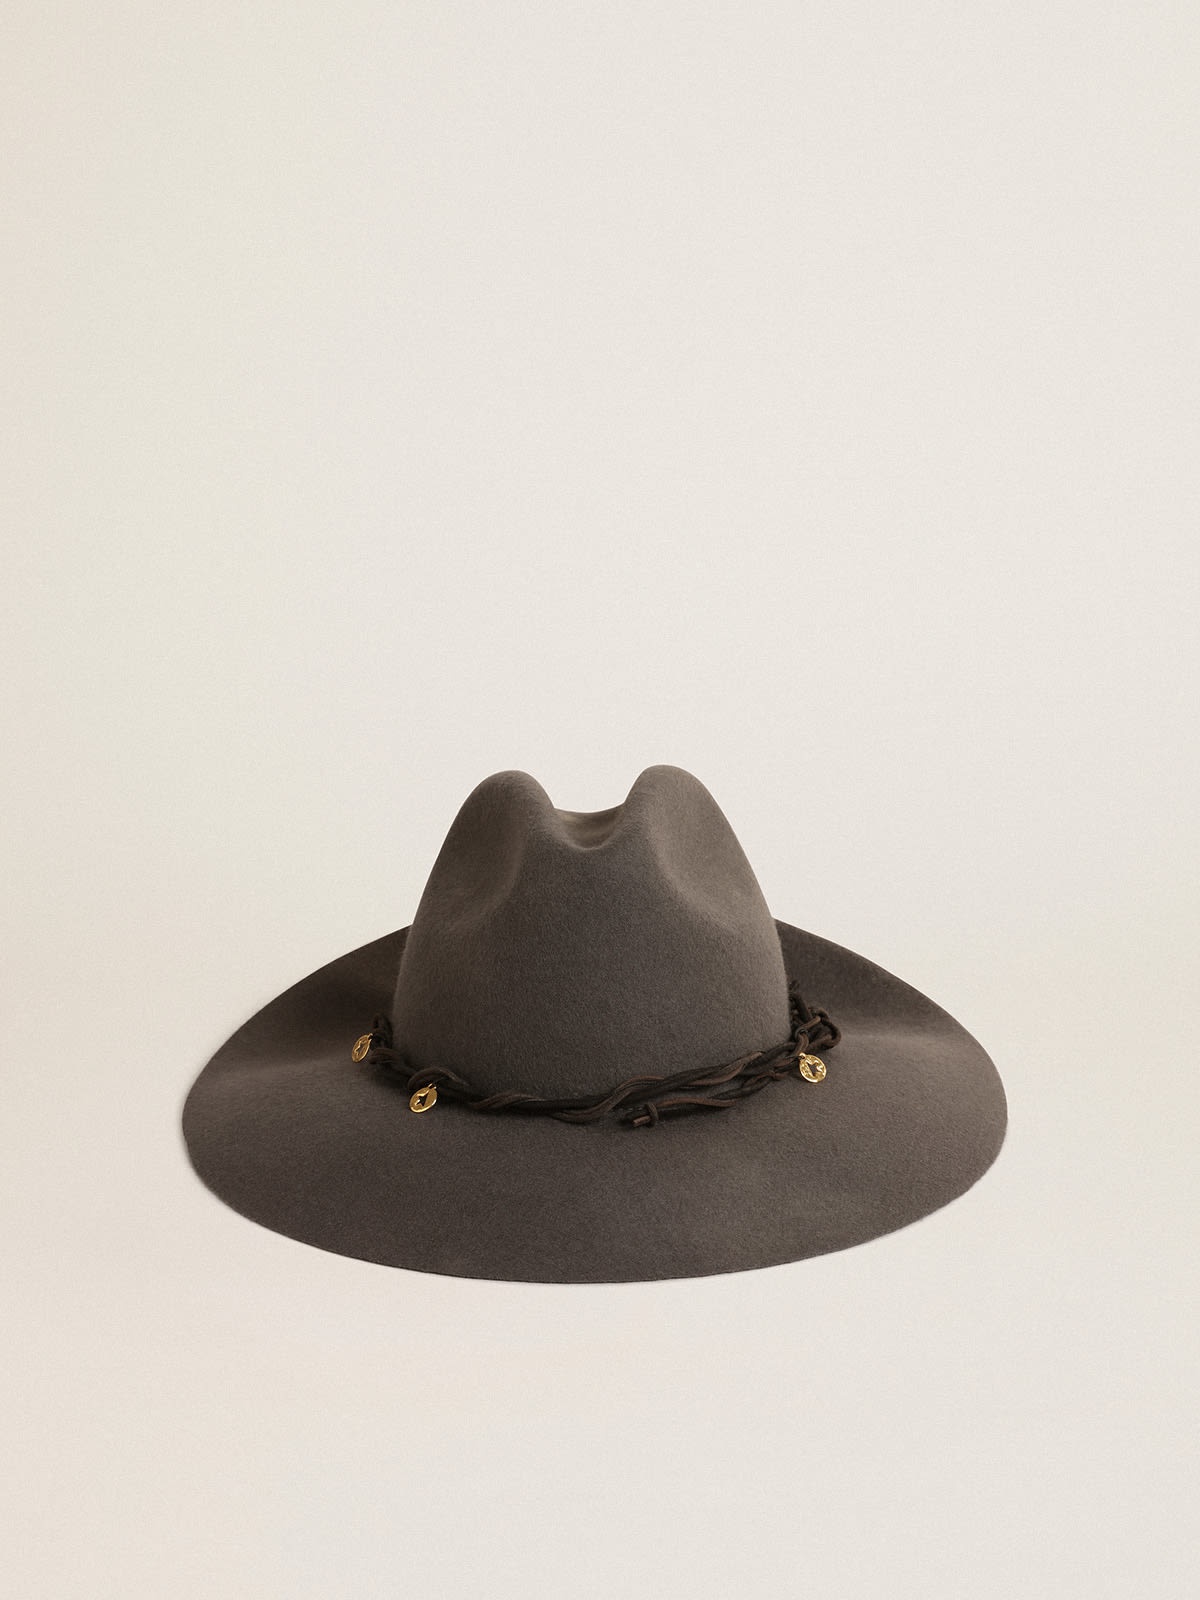 Gray wool Fedora hat with leather strap and pendants - 1